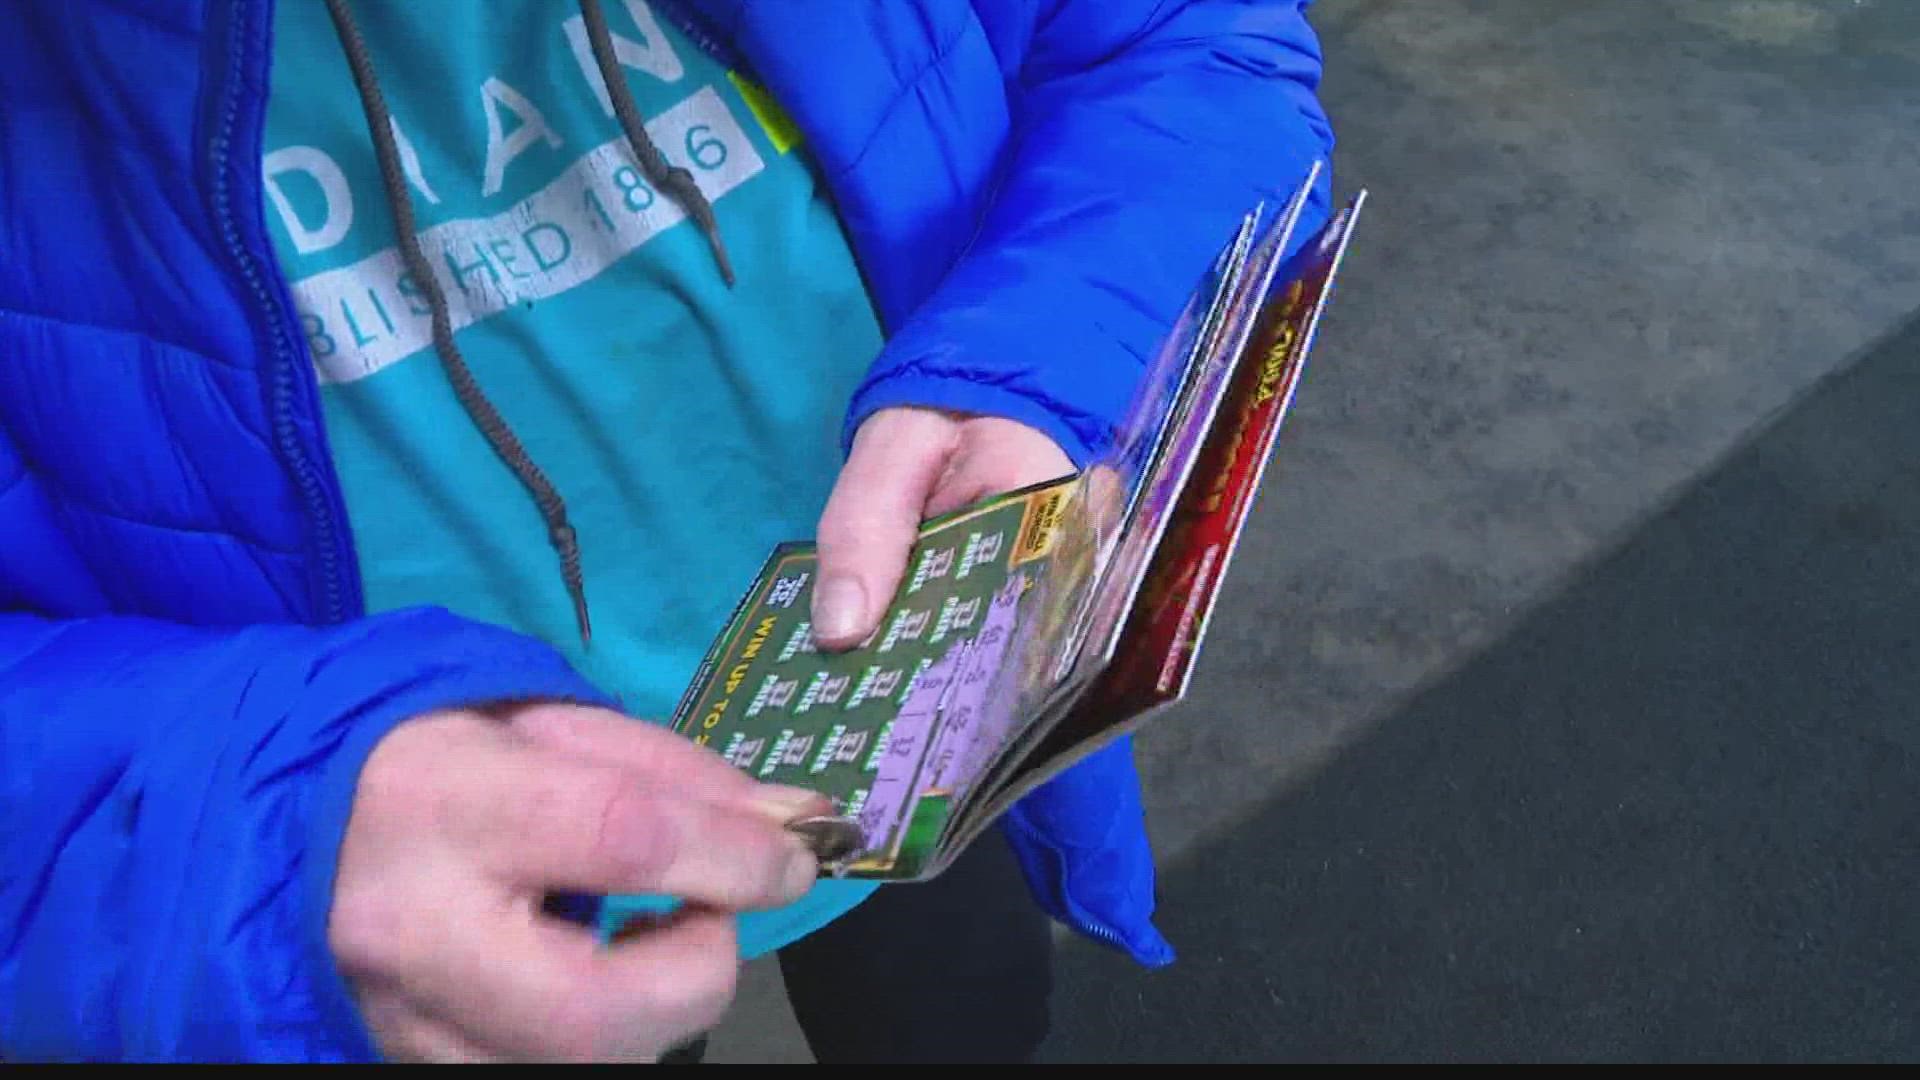 The Hoosier Lottery provides information that could help improve success for customers.